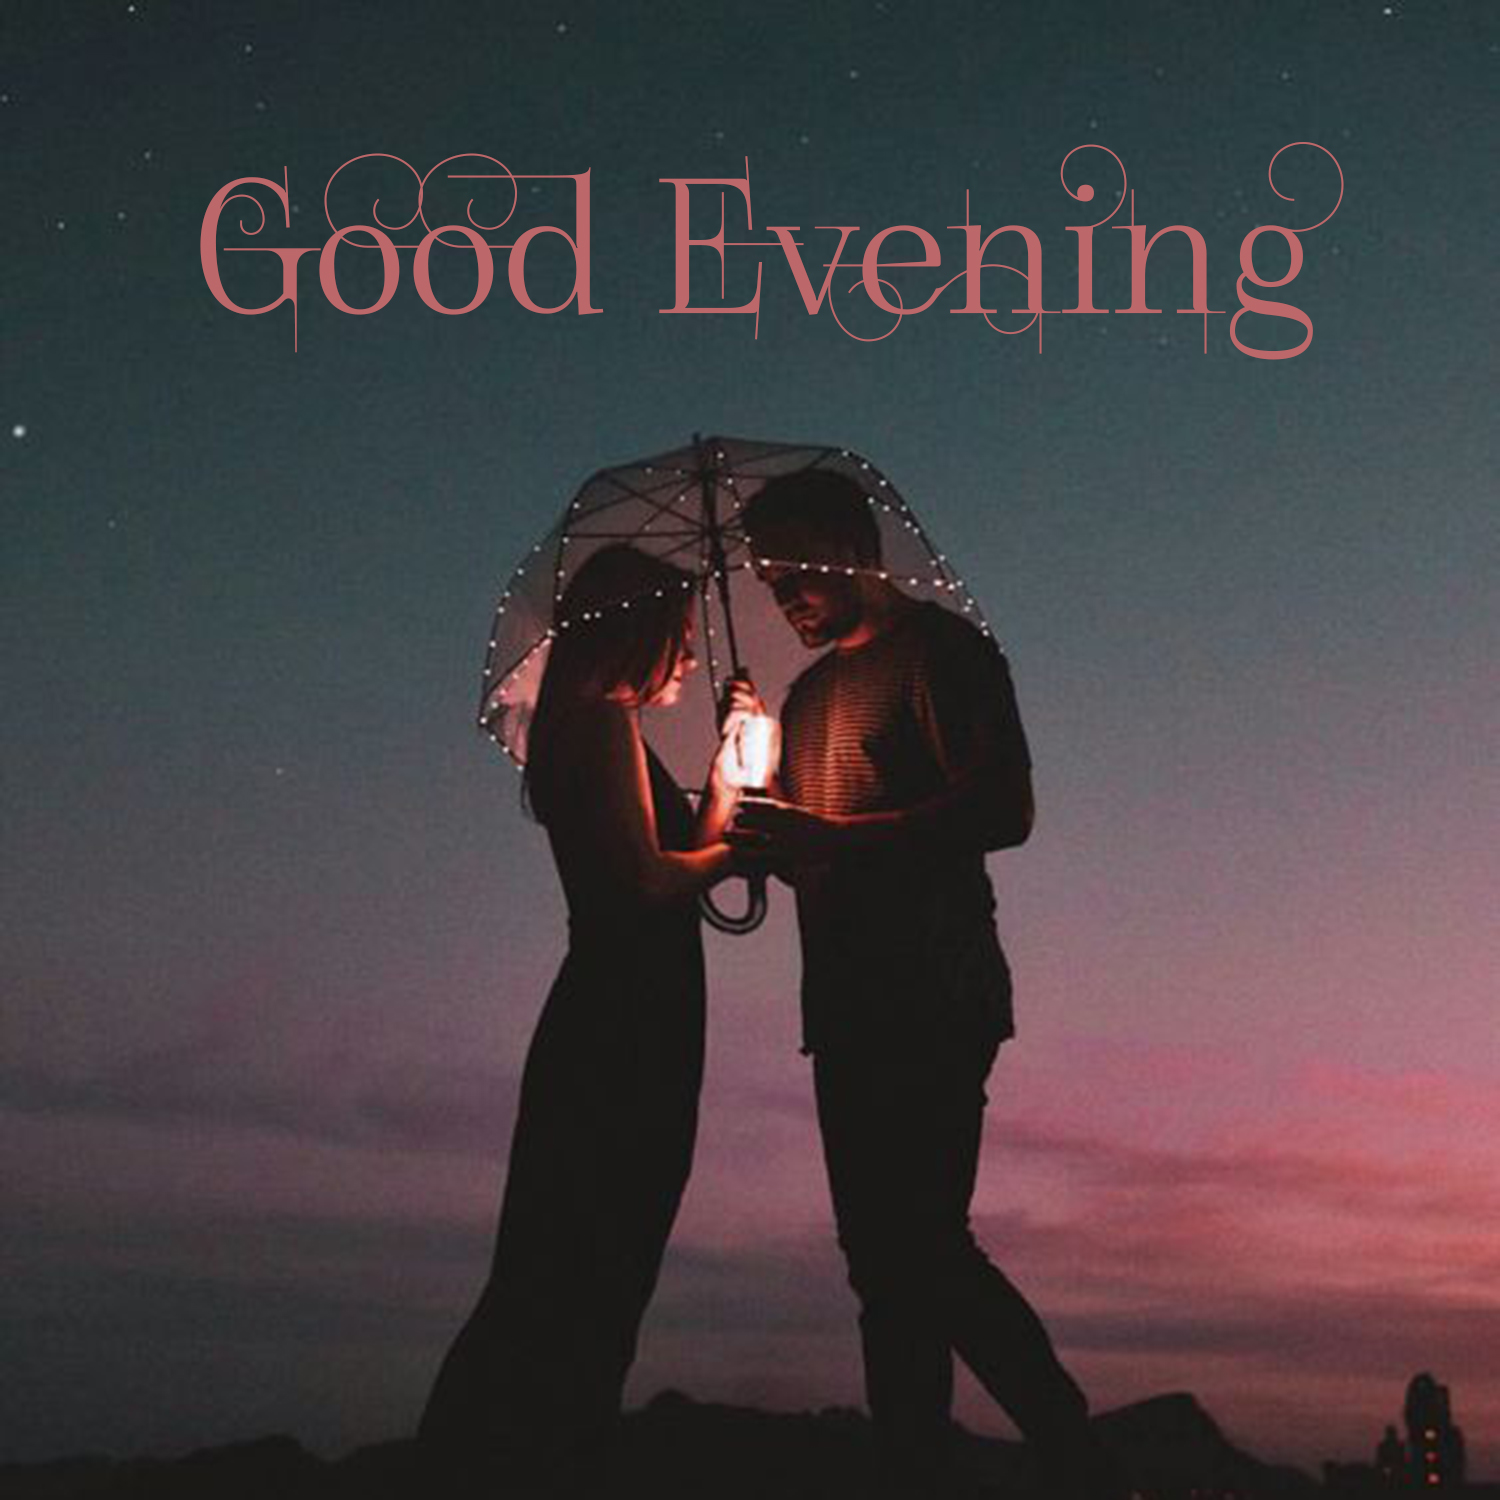 Good Evening Couple Images Good Morning Images Quotes Wishes Messages Greetings Ecards